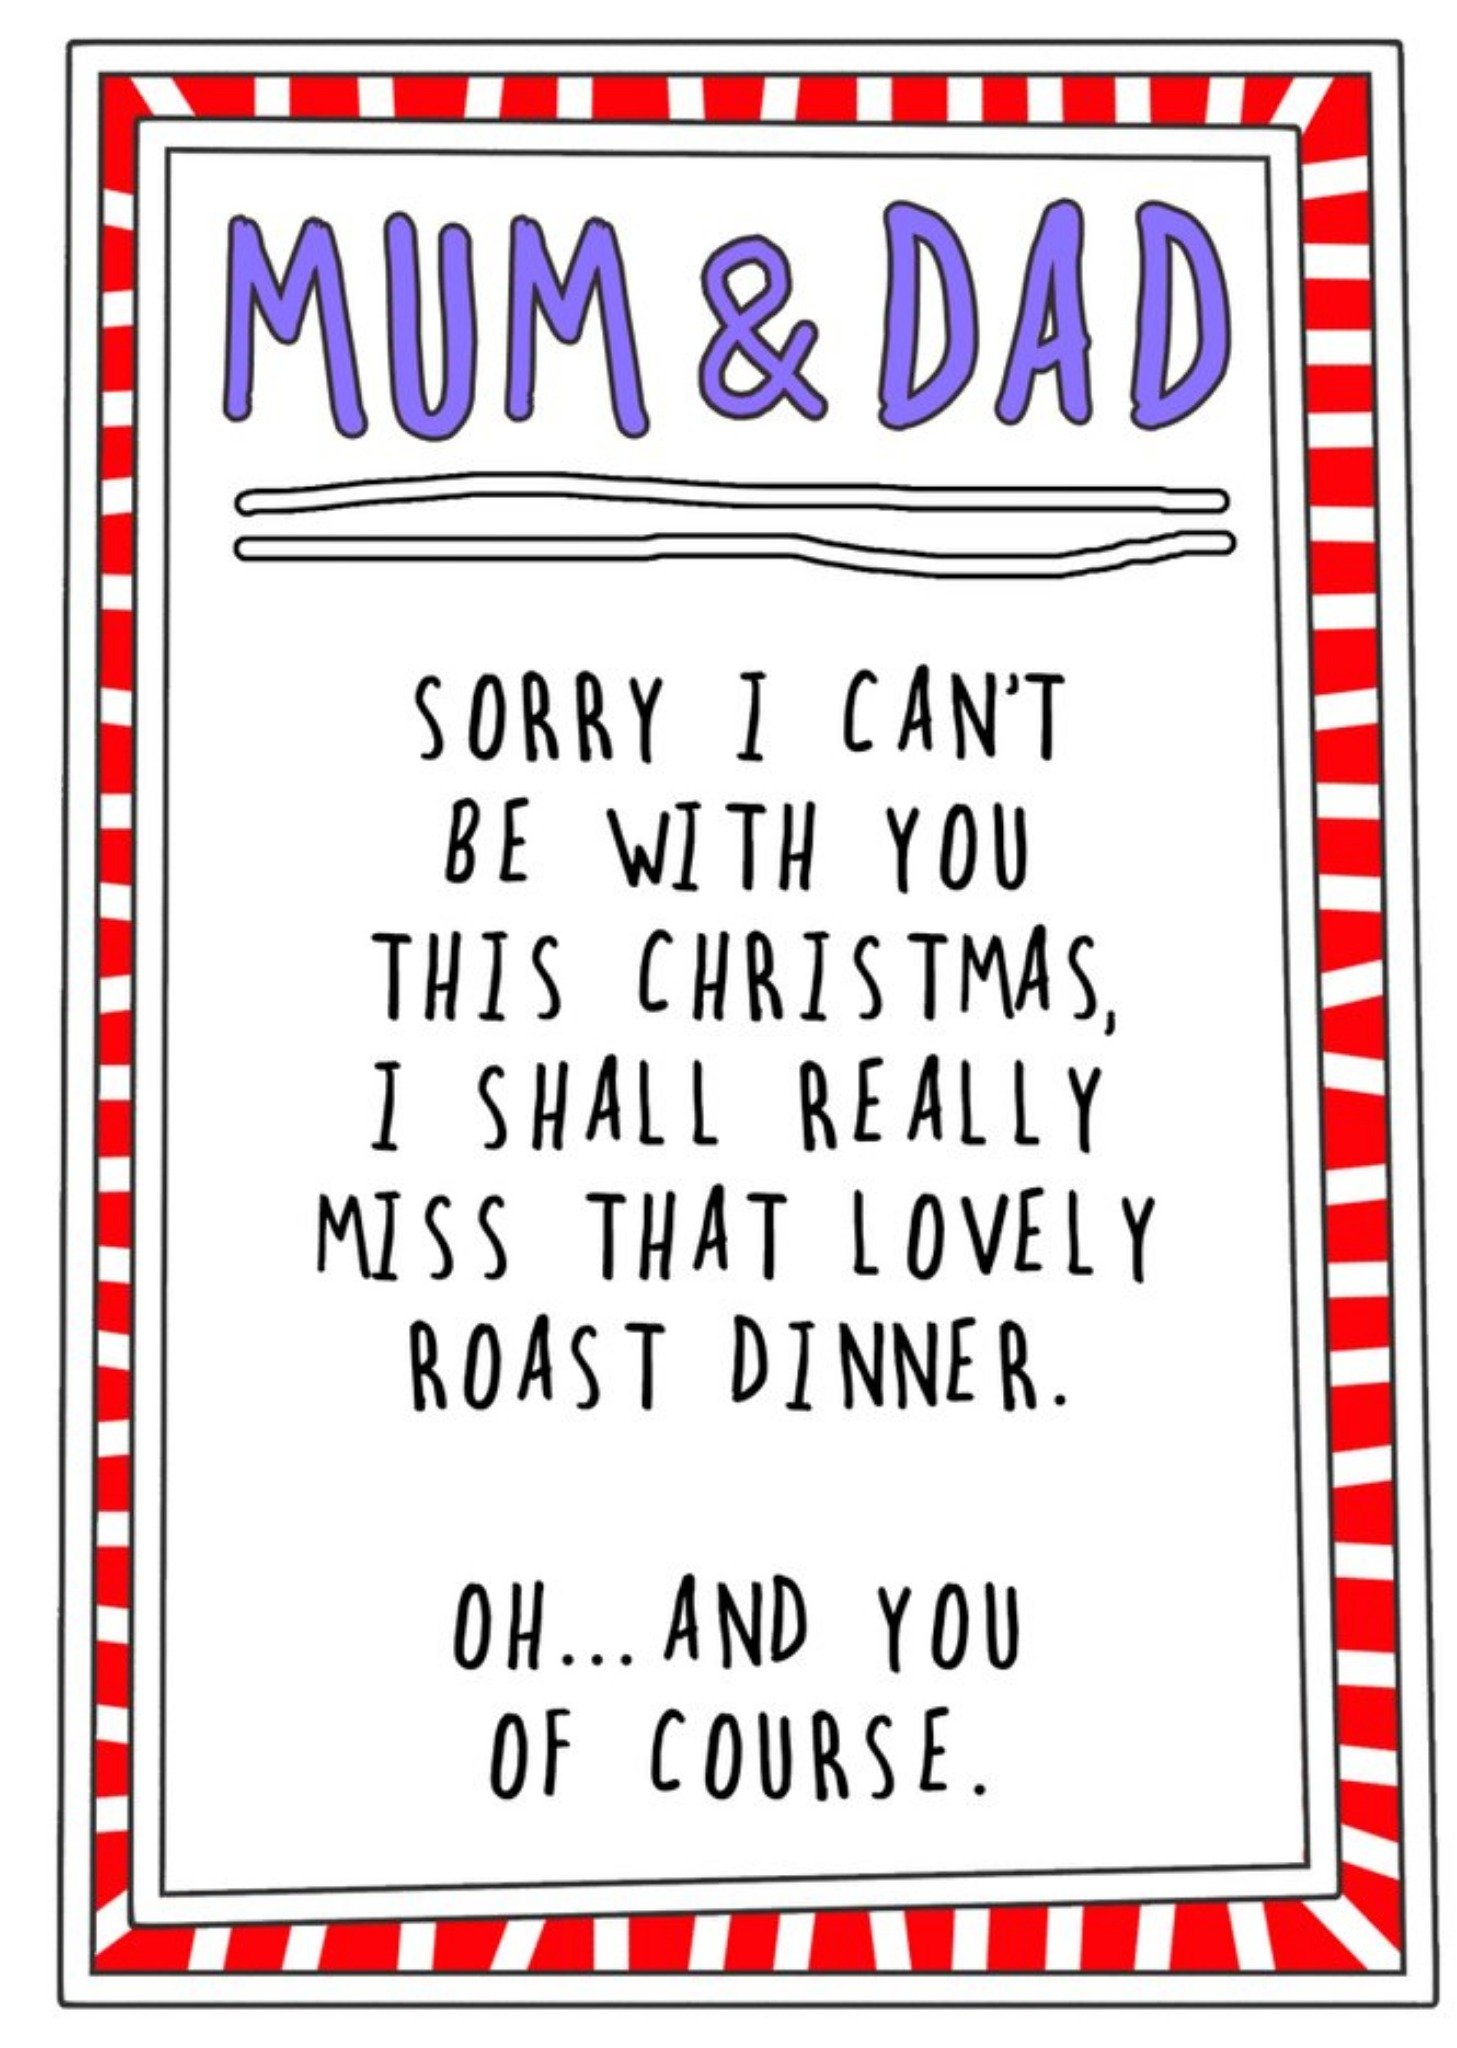 Go La La Funny Mum And Dad I Will Miss The Roast And You Chistmas Card Ecard